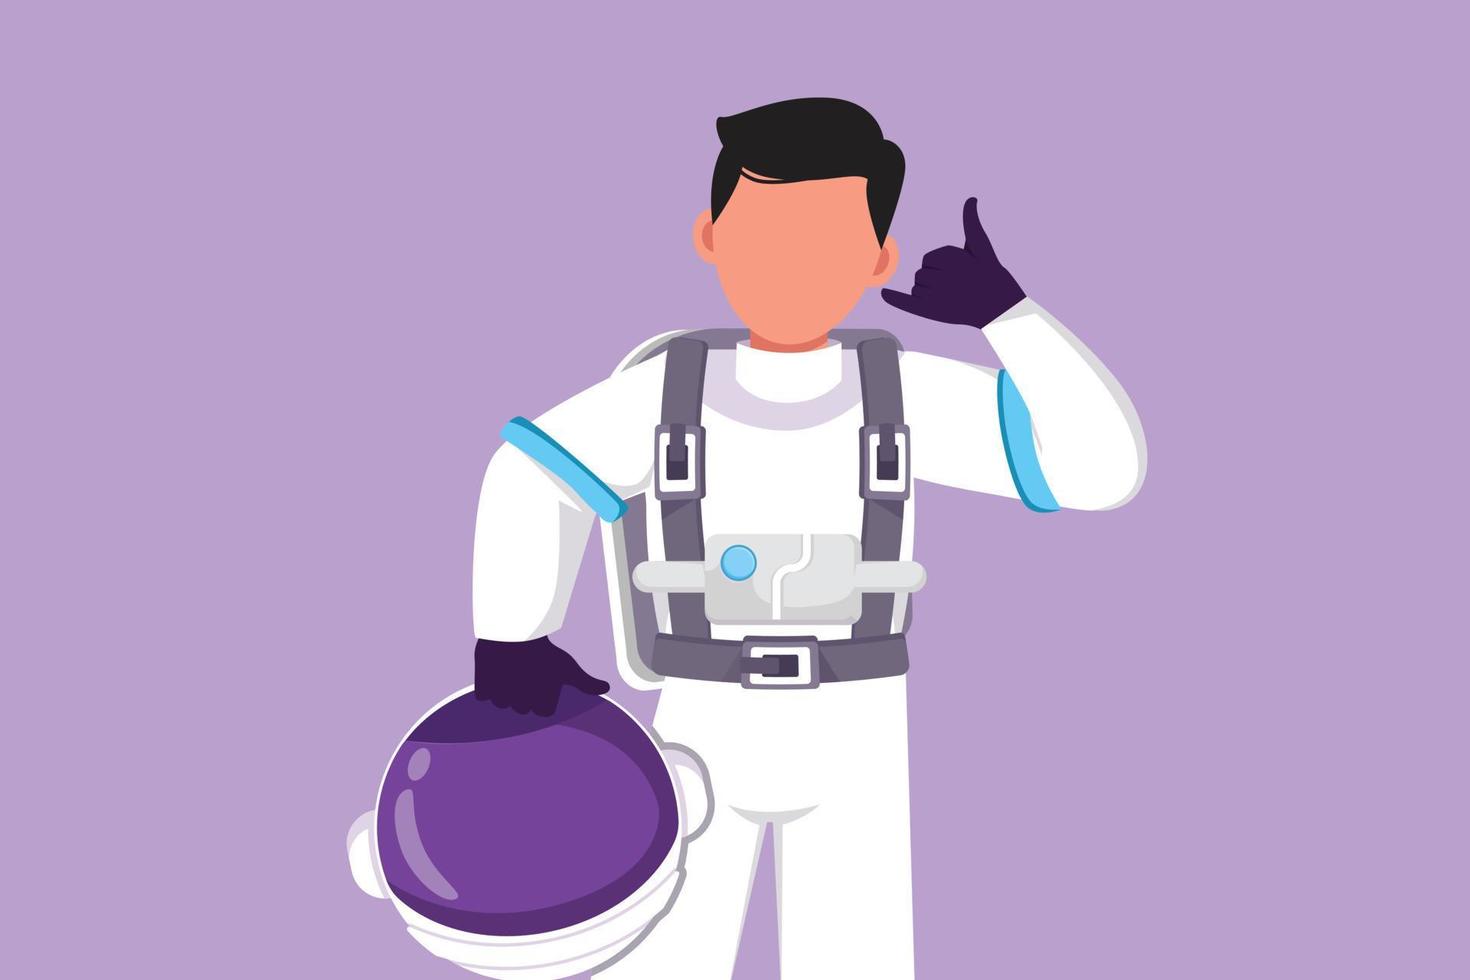 Character flat drawing active male astronaut holding helmet with call me gesture wearing spacesuit and ready to explore outer space in search mysteries of universe. Cartoon design vector illustration